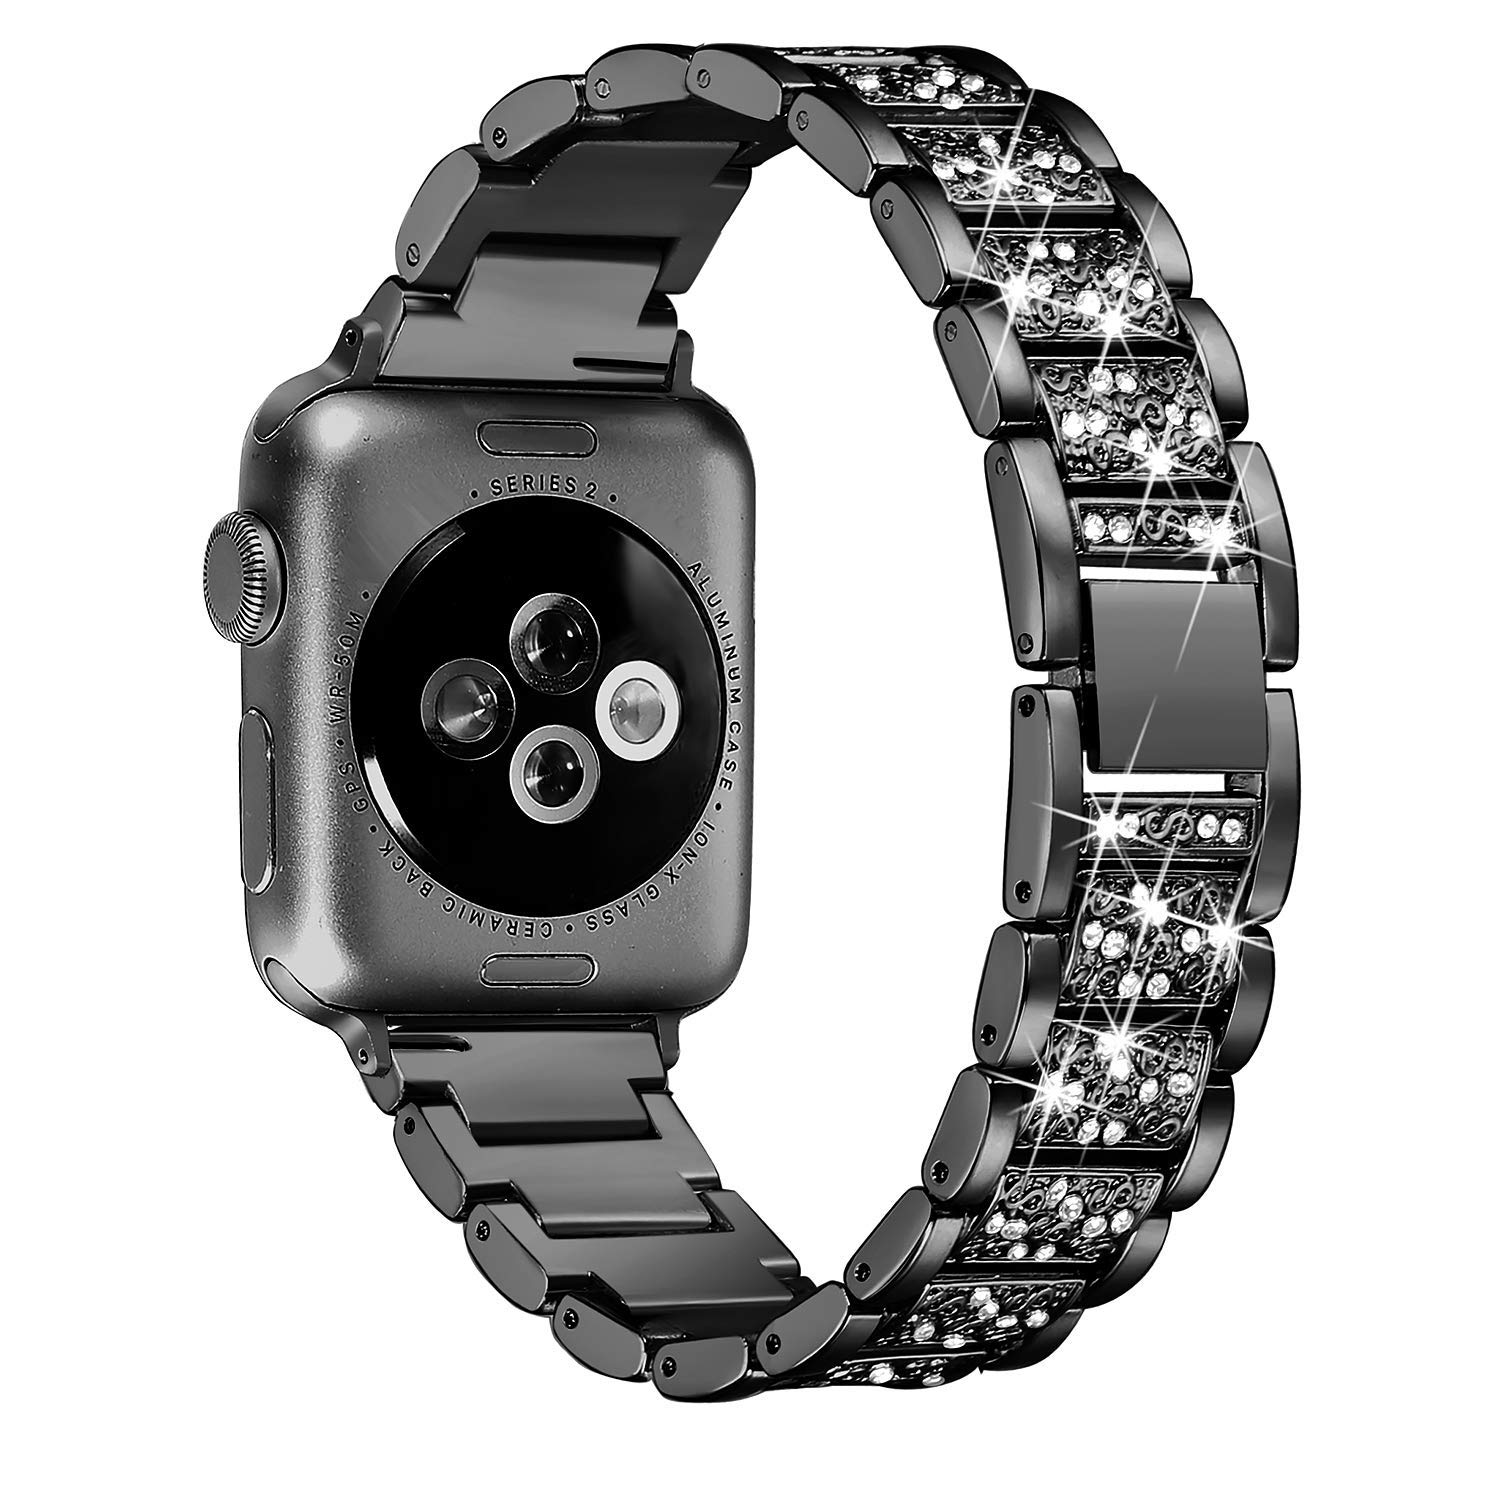 Crystal Patterned Metal Band for Apple Watch